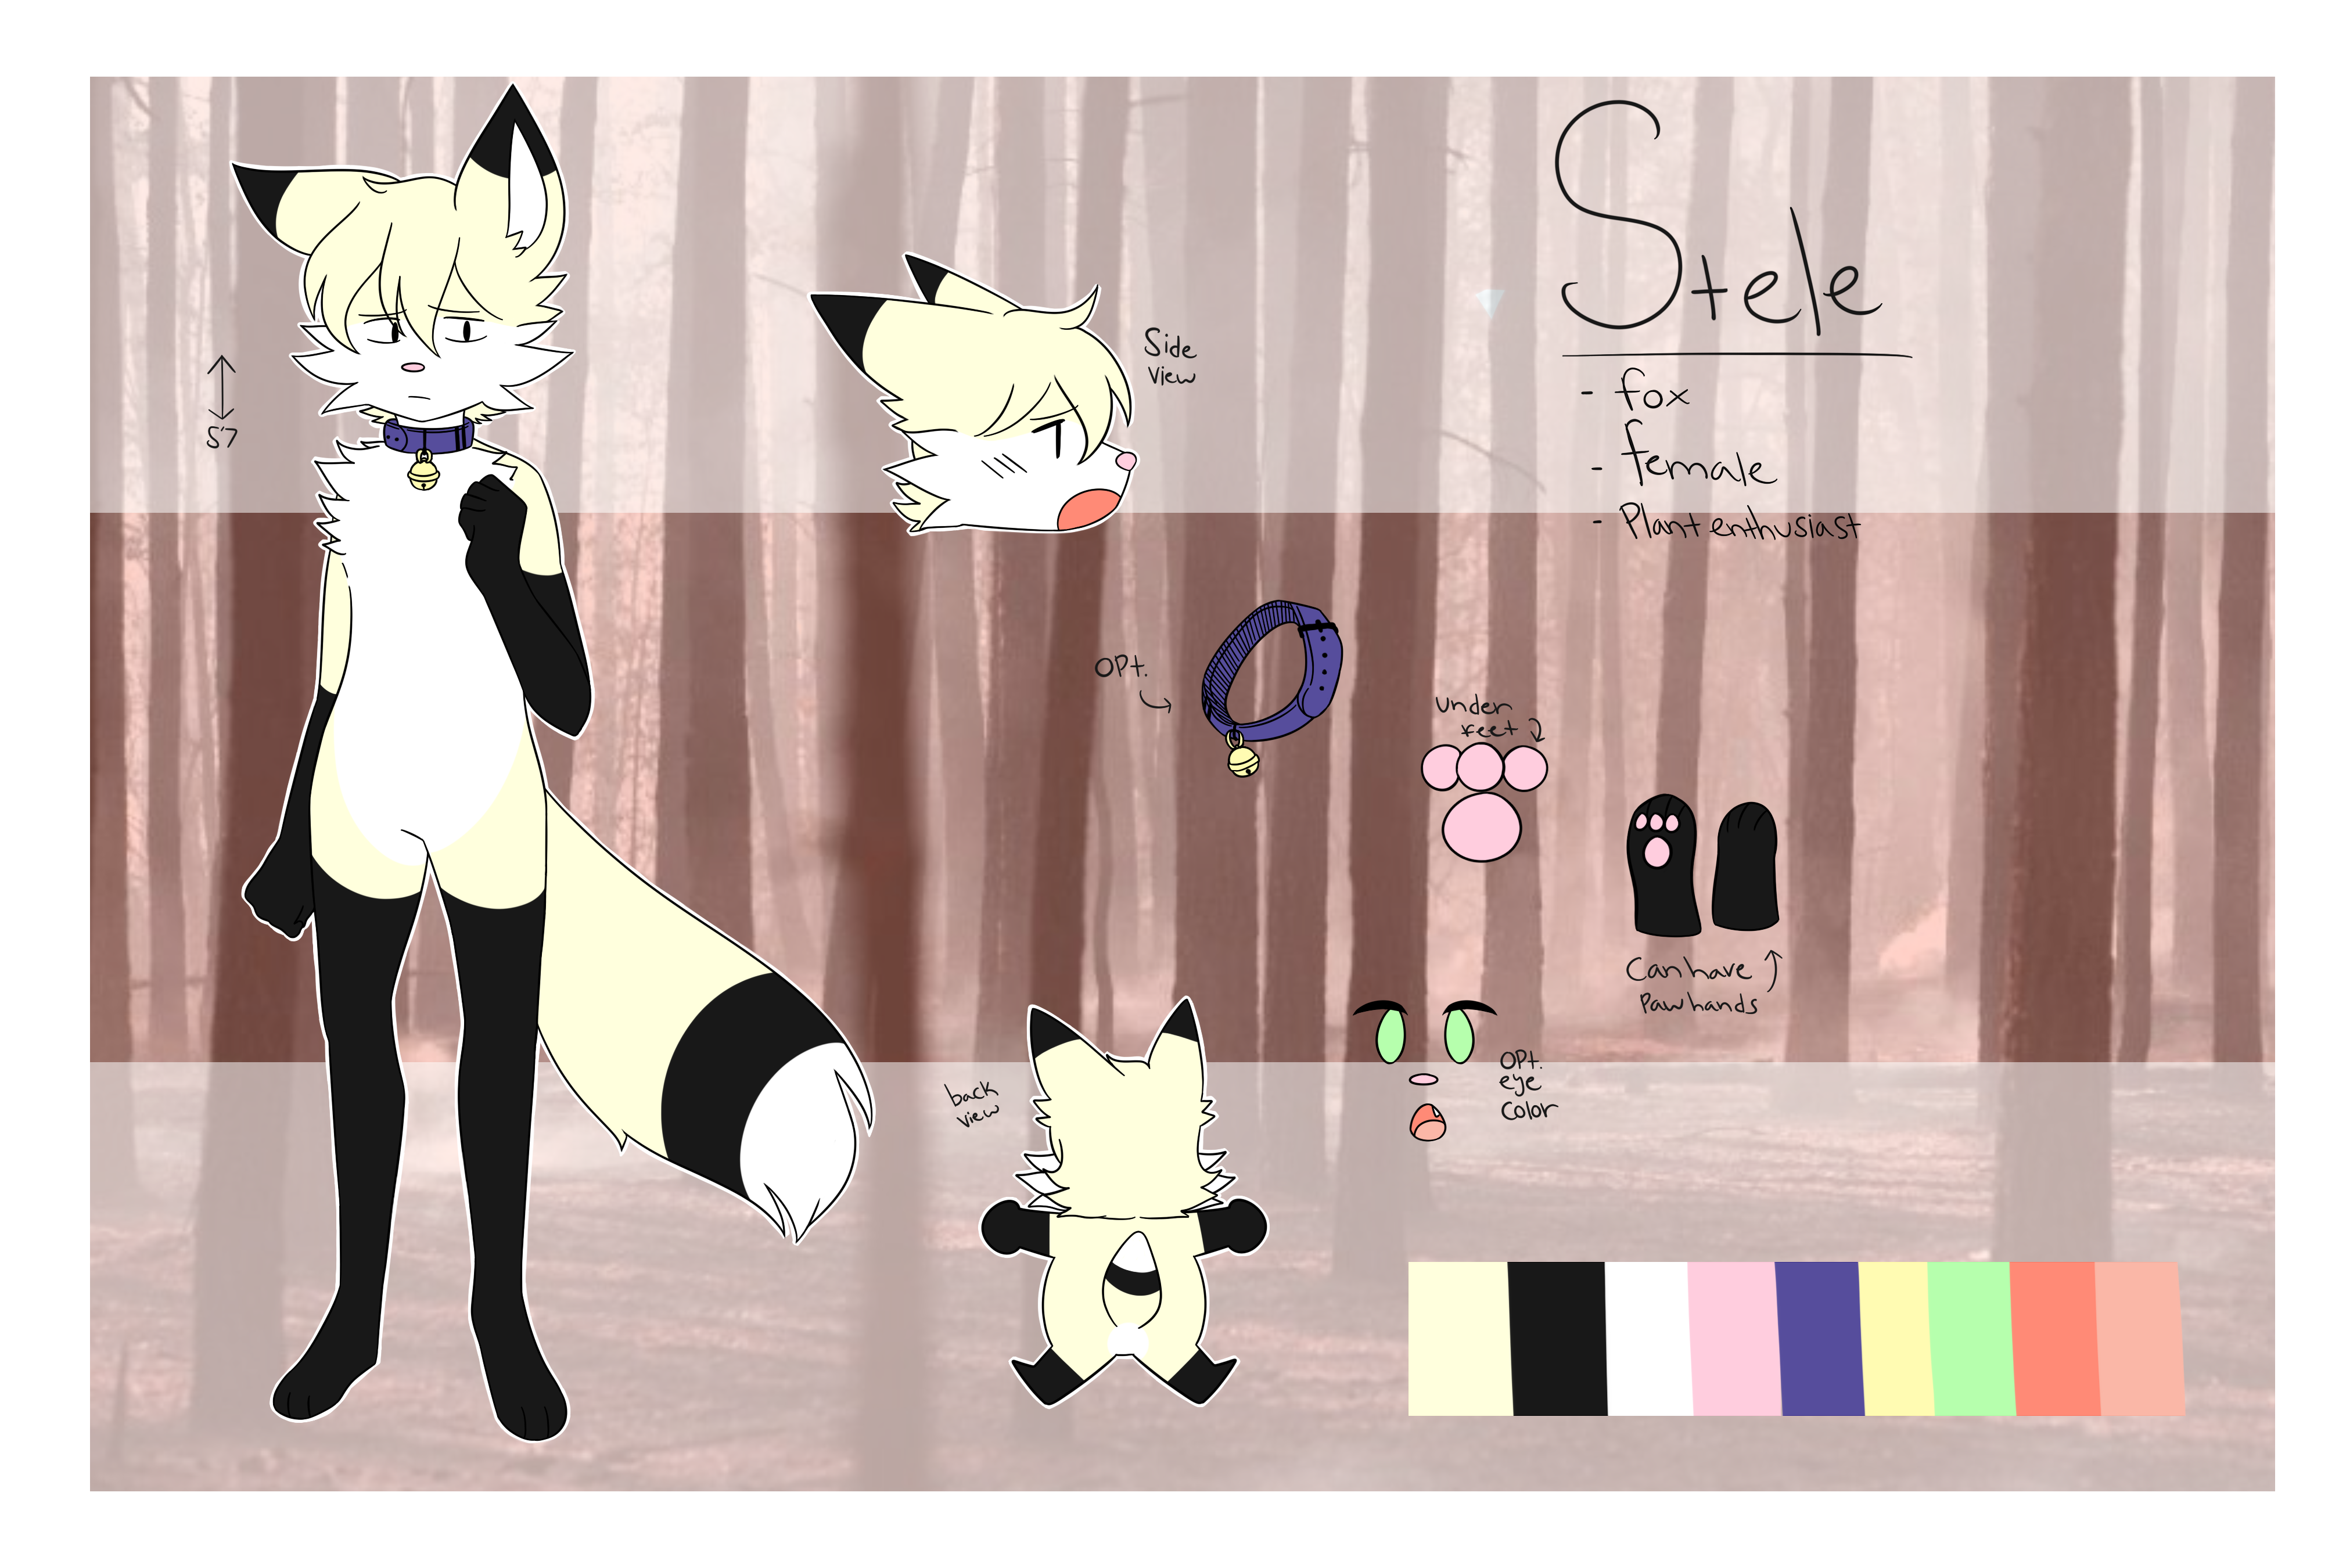 stele ref (outdated)